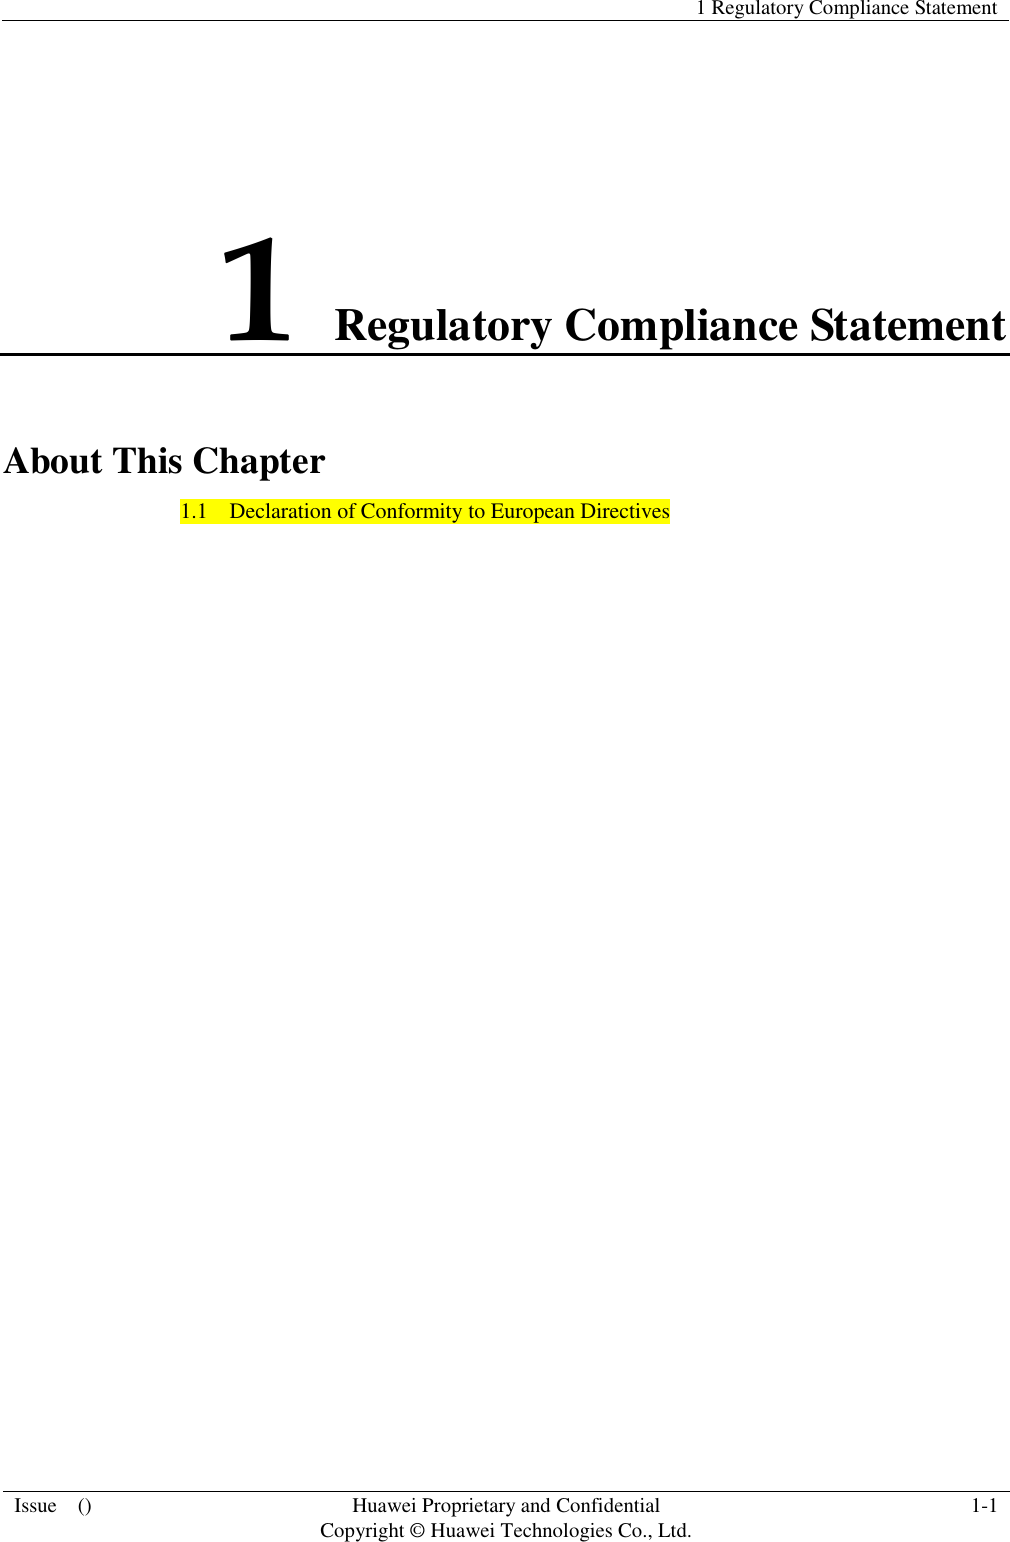   1 Regulatory Compliance Statement  Issue    () Huawei Proprietary and Confidential                                     Copyright © Huawei Technologies Co., Ltd. 1-1  1 Regulatory Compliance Statement About This Chapter 1.1    Declaration of Conformity to European Directives 